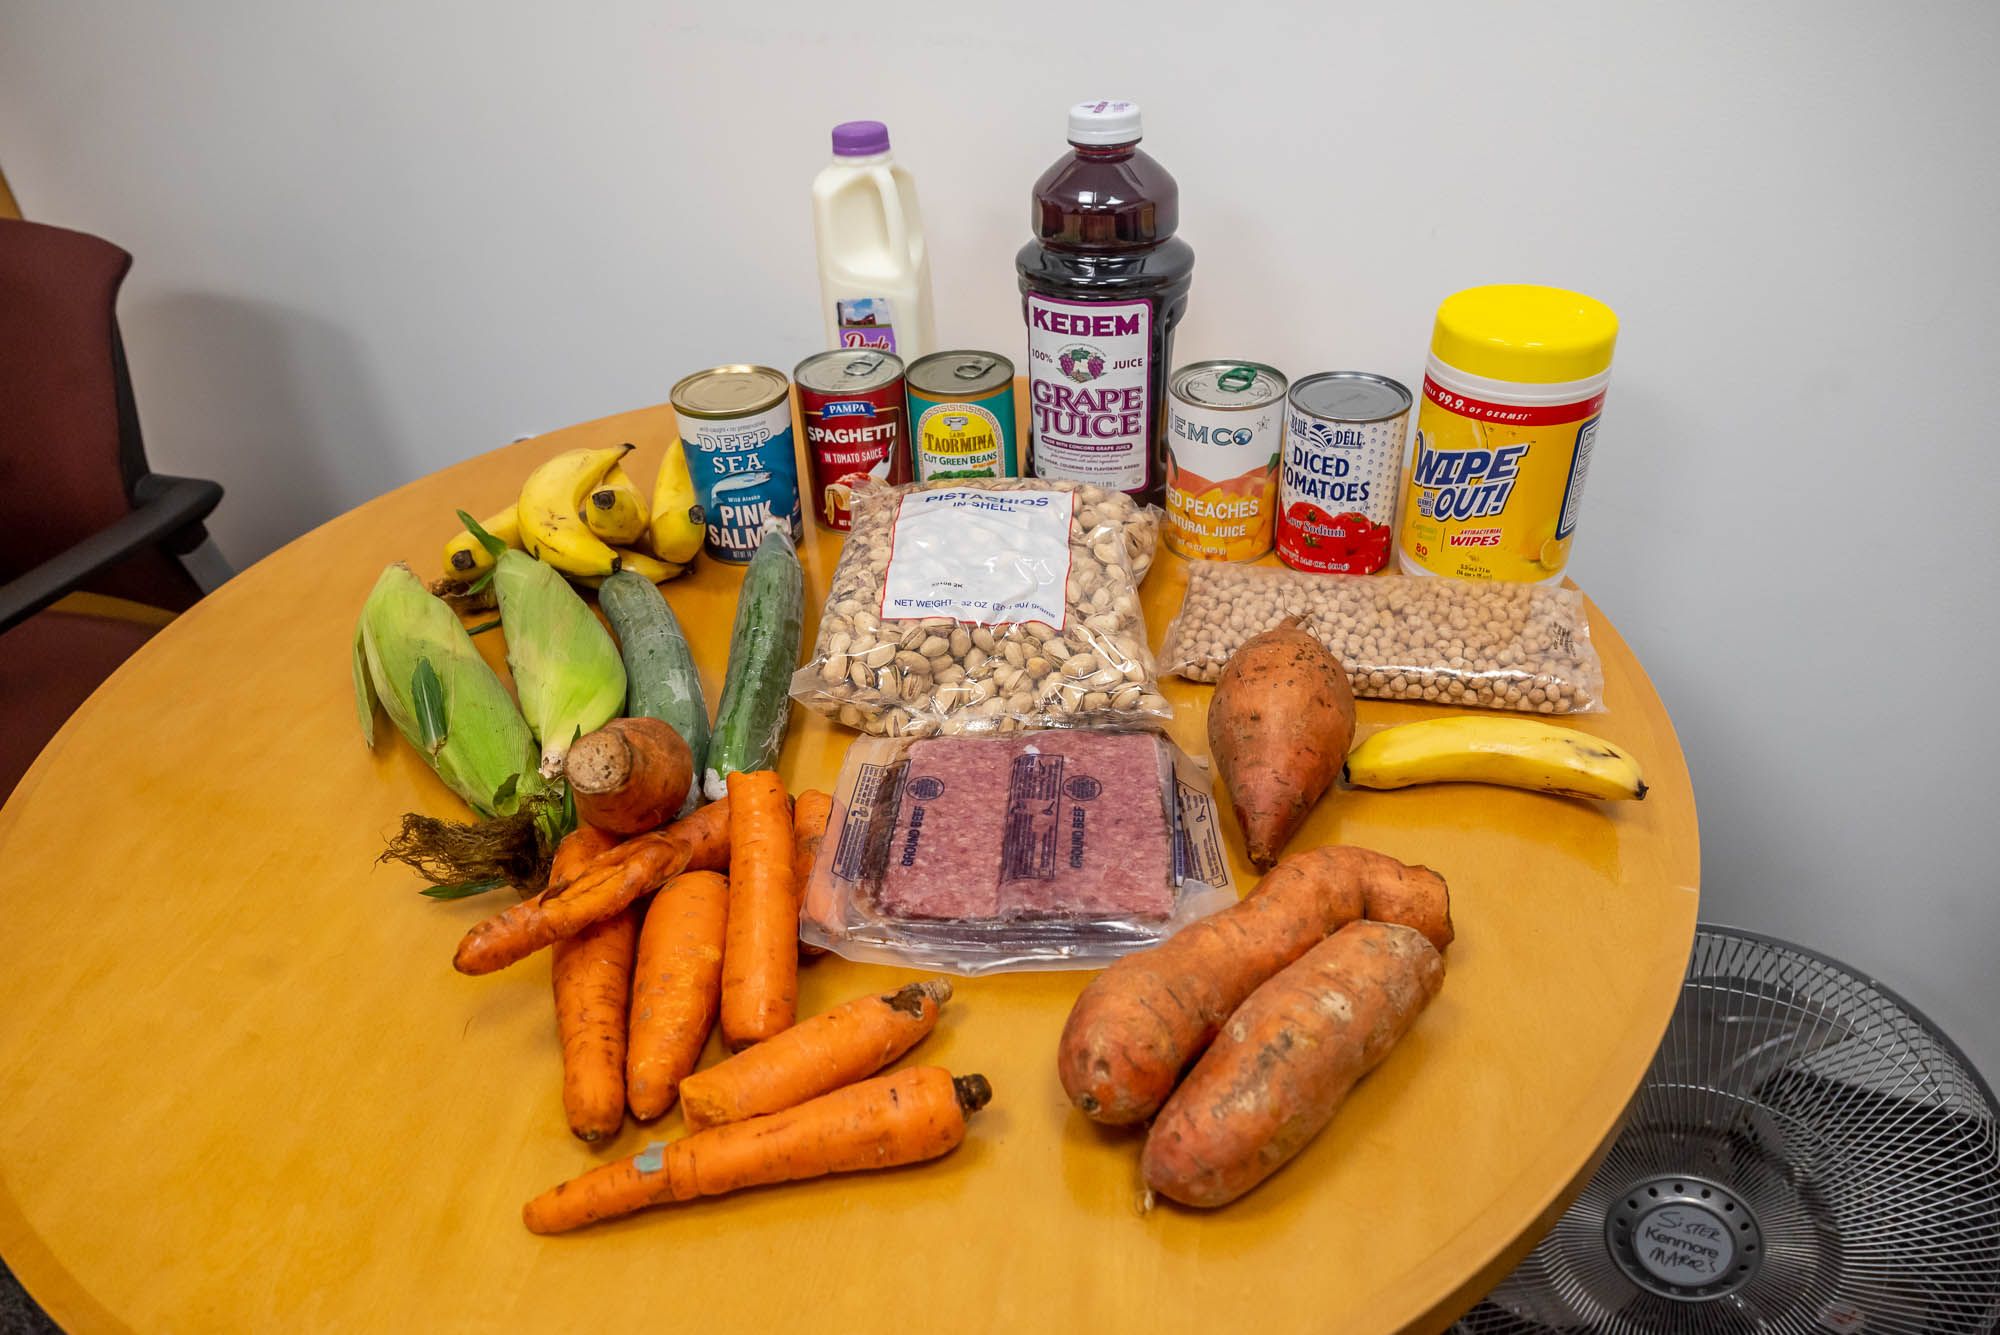 Carrots, corn, sweet potatoes, grape juice, and other items on a table.